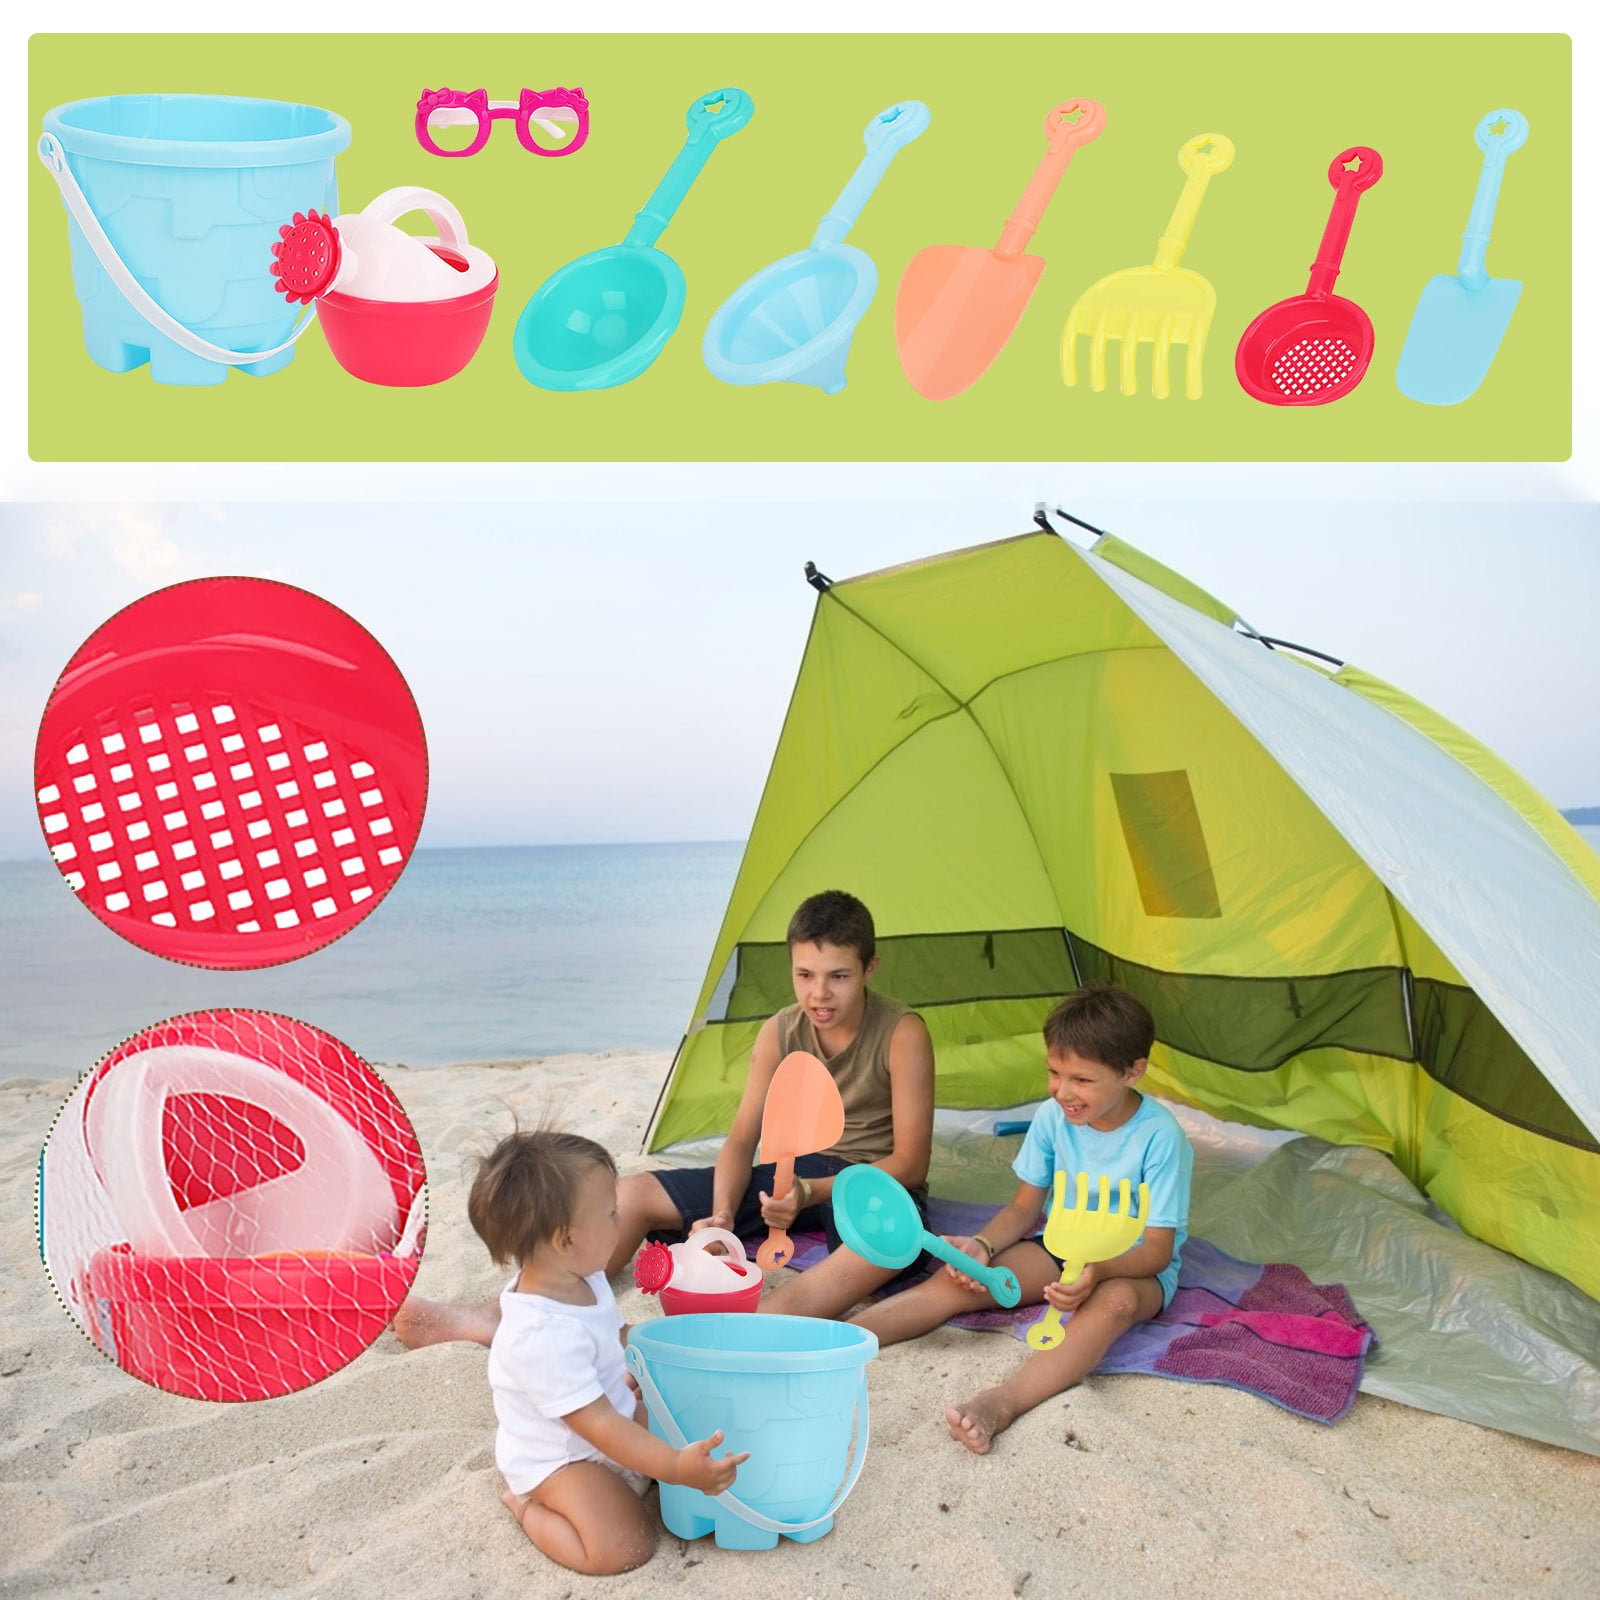 9PCS KIDS CUTE SIMULATED ICE CREAM SAND PLAY MOLD TOOL OUTDOOR BEACH GAME TOY 